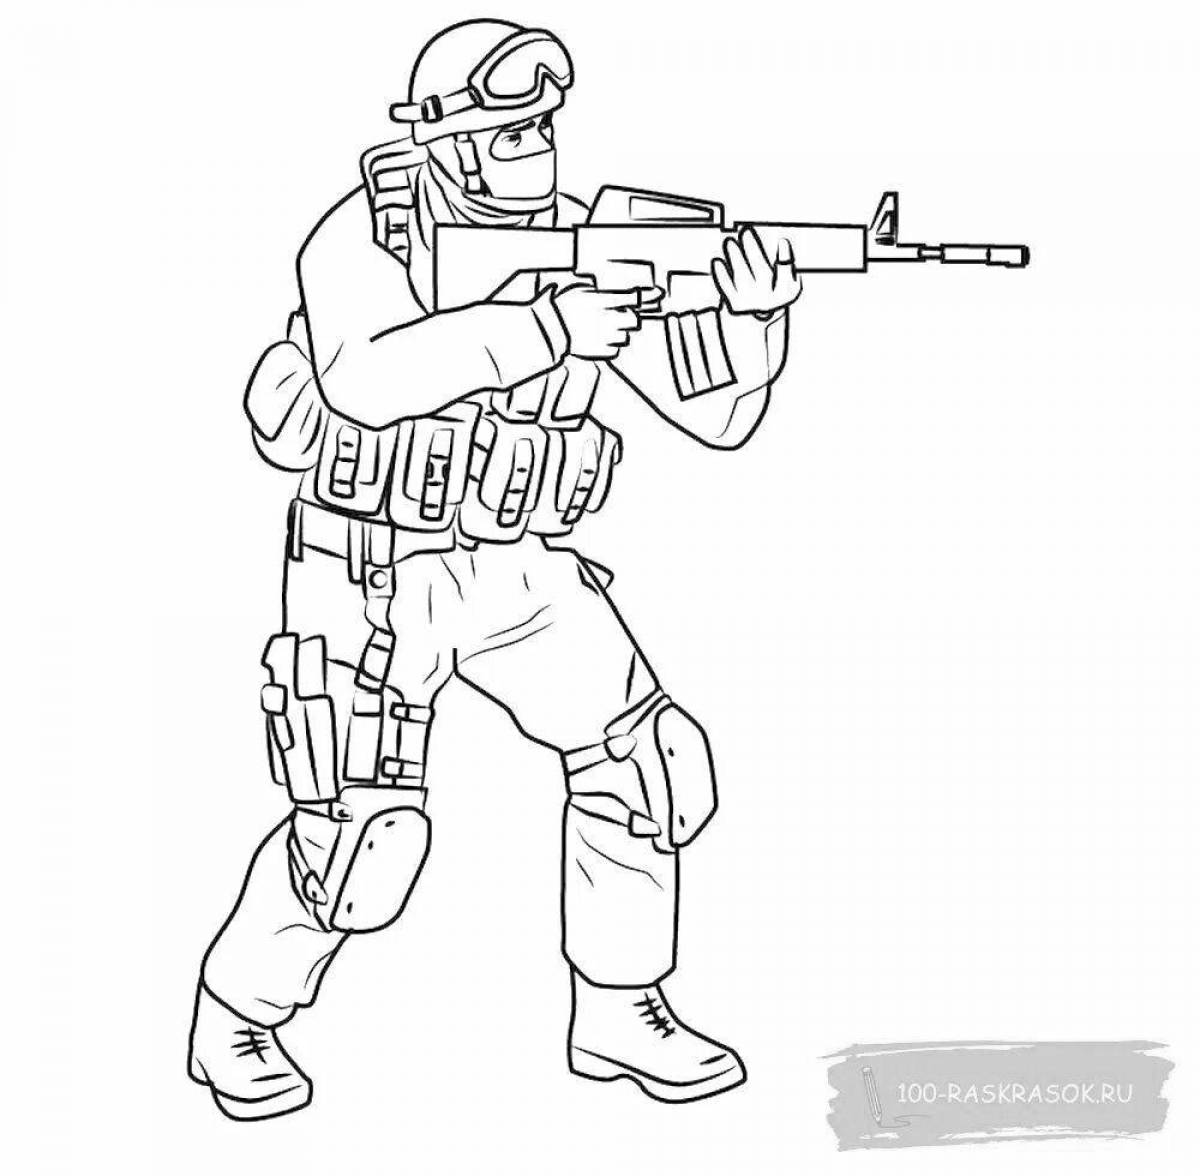 Playful standoff 2 bomb coloring page